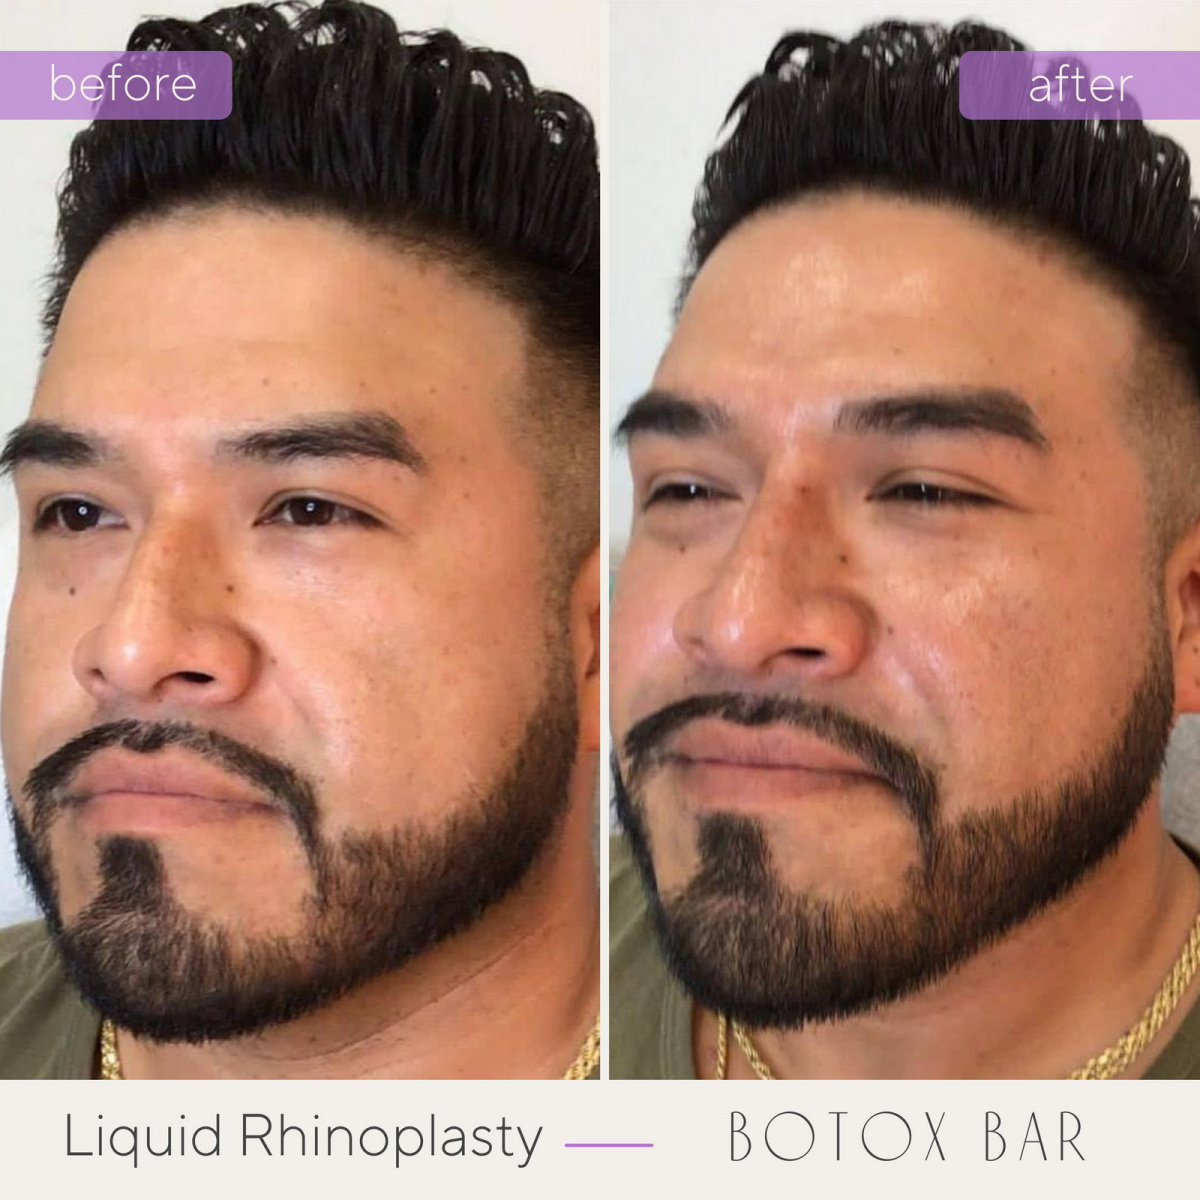 Before and After Liquid Rhinoplasty in The Botox Bar and Aesthetics at Dallas & Sherman, TX